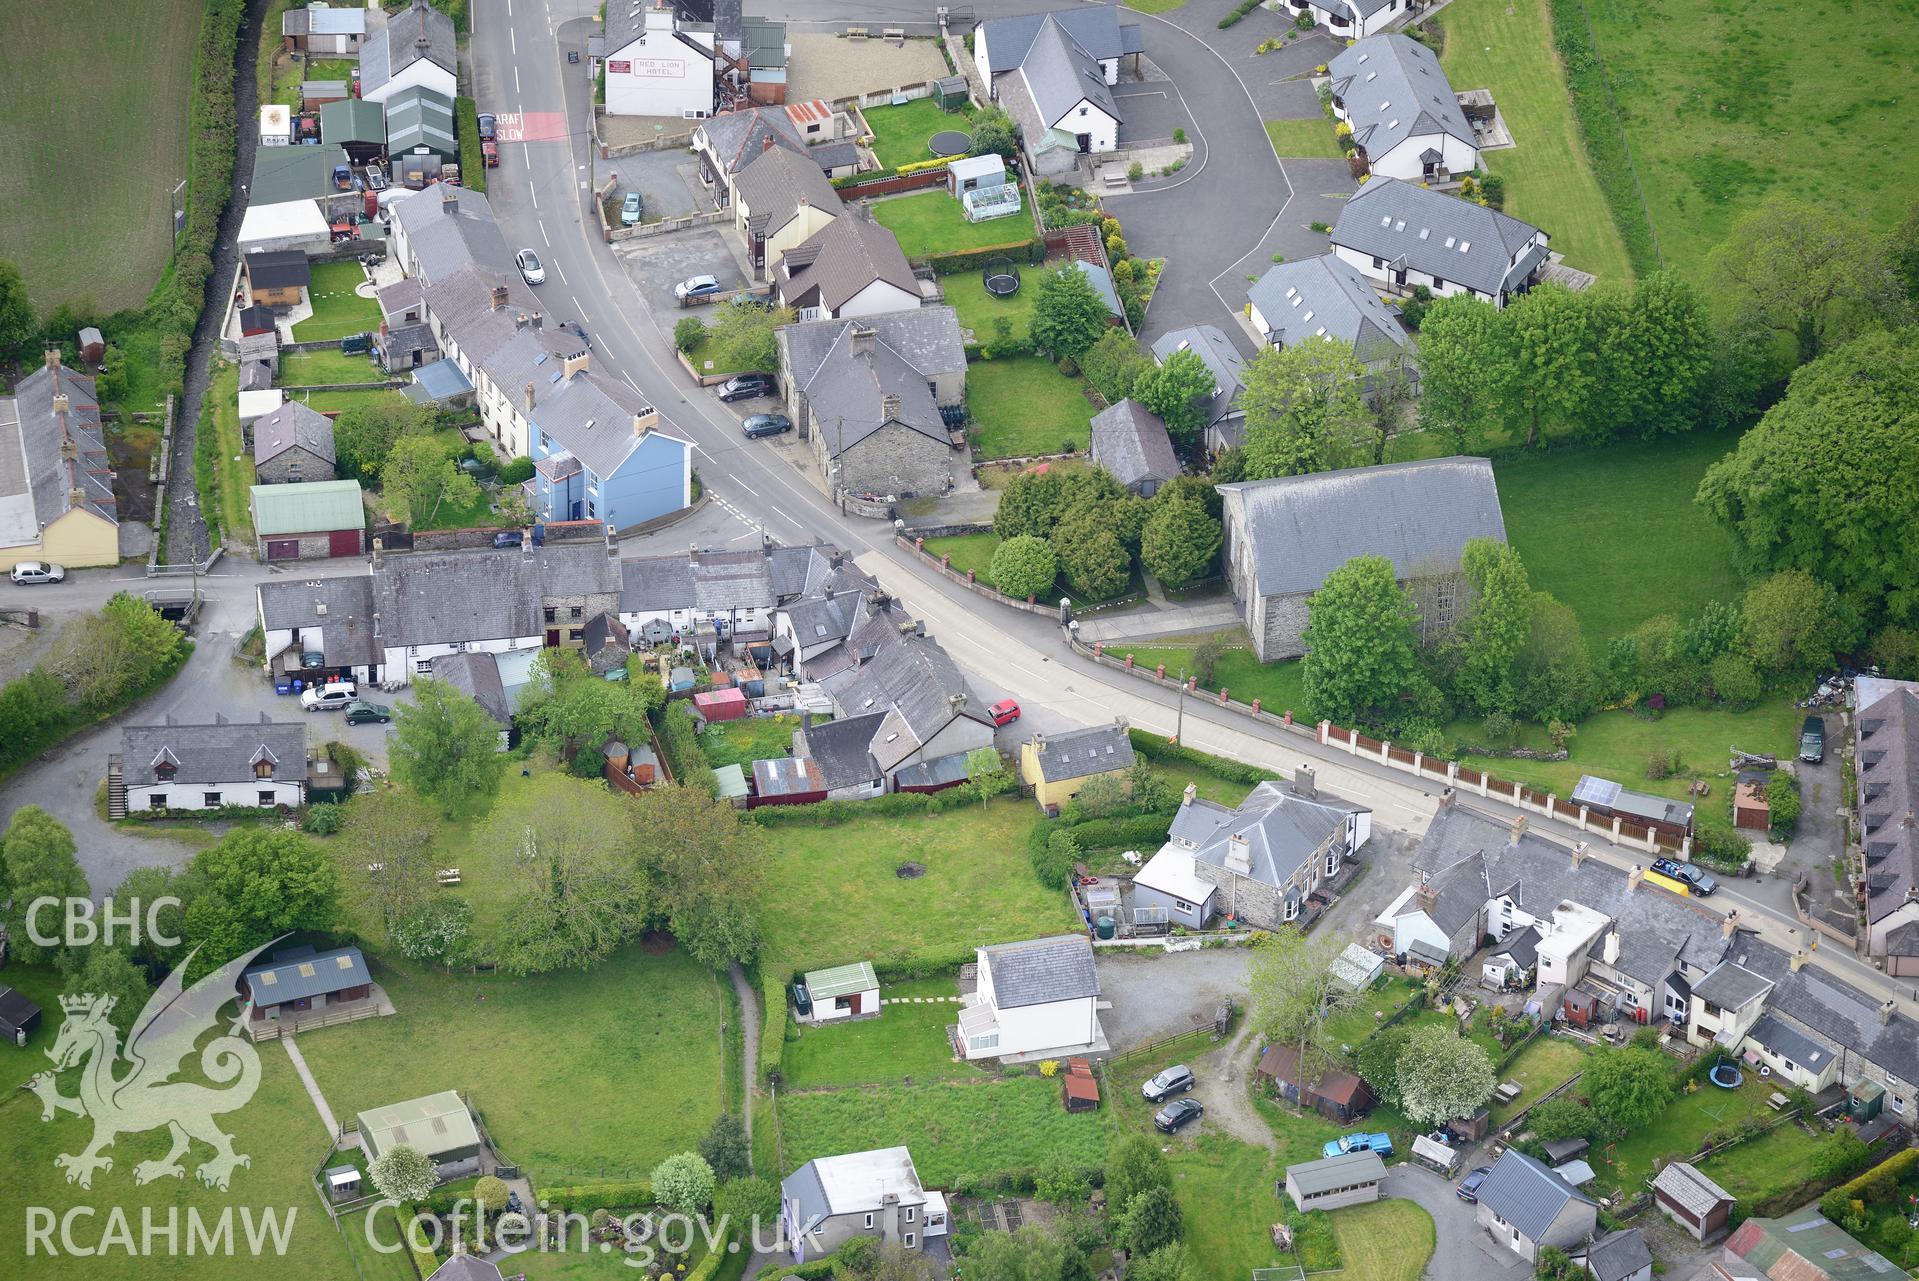 Bethania Calvinistic Methodist Chapel and Sunday School, Pontrhydfendigaid. Oblique aerial photograph taken during the Royal Commission's programme of archaeological aerial reconnaissance by Toby Driver on 3rd June 2015.